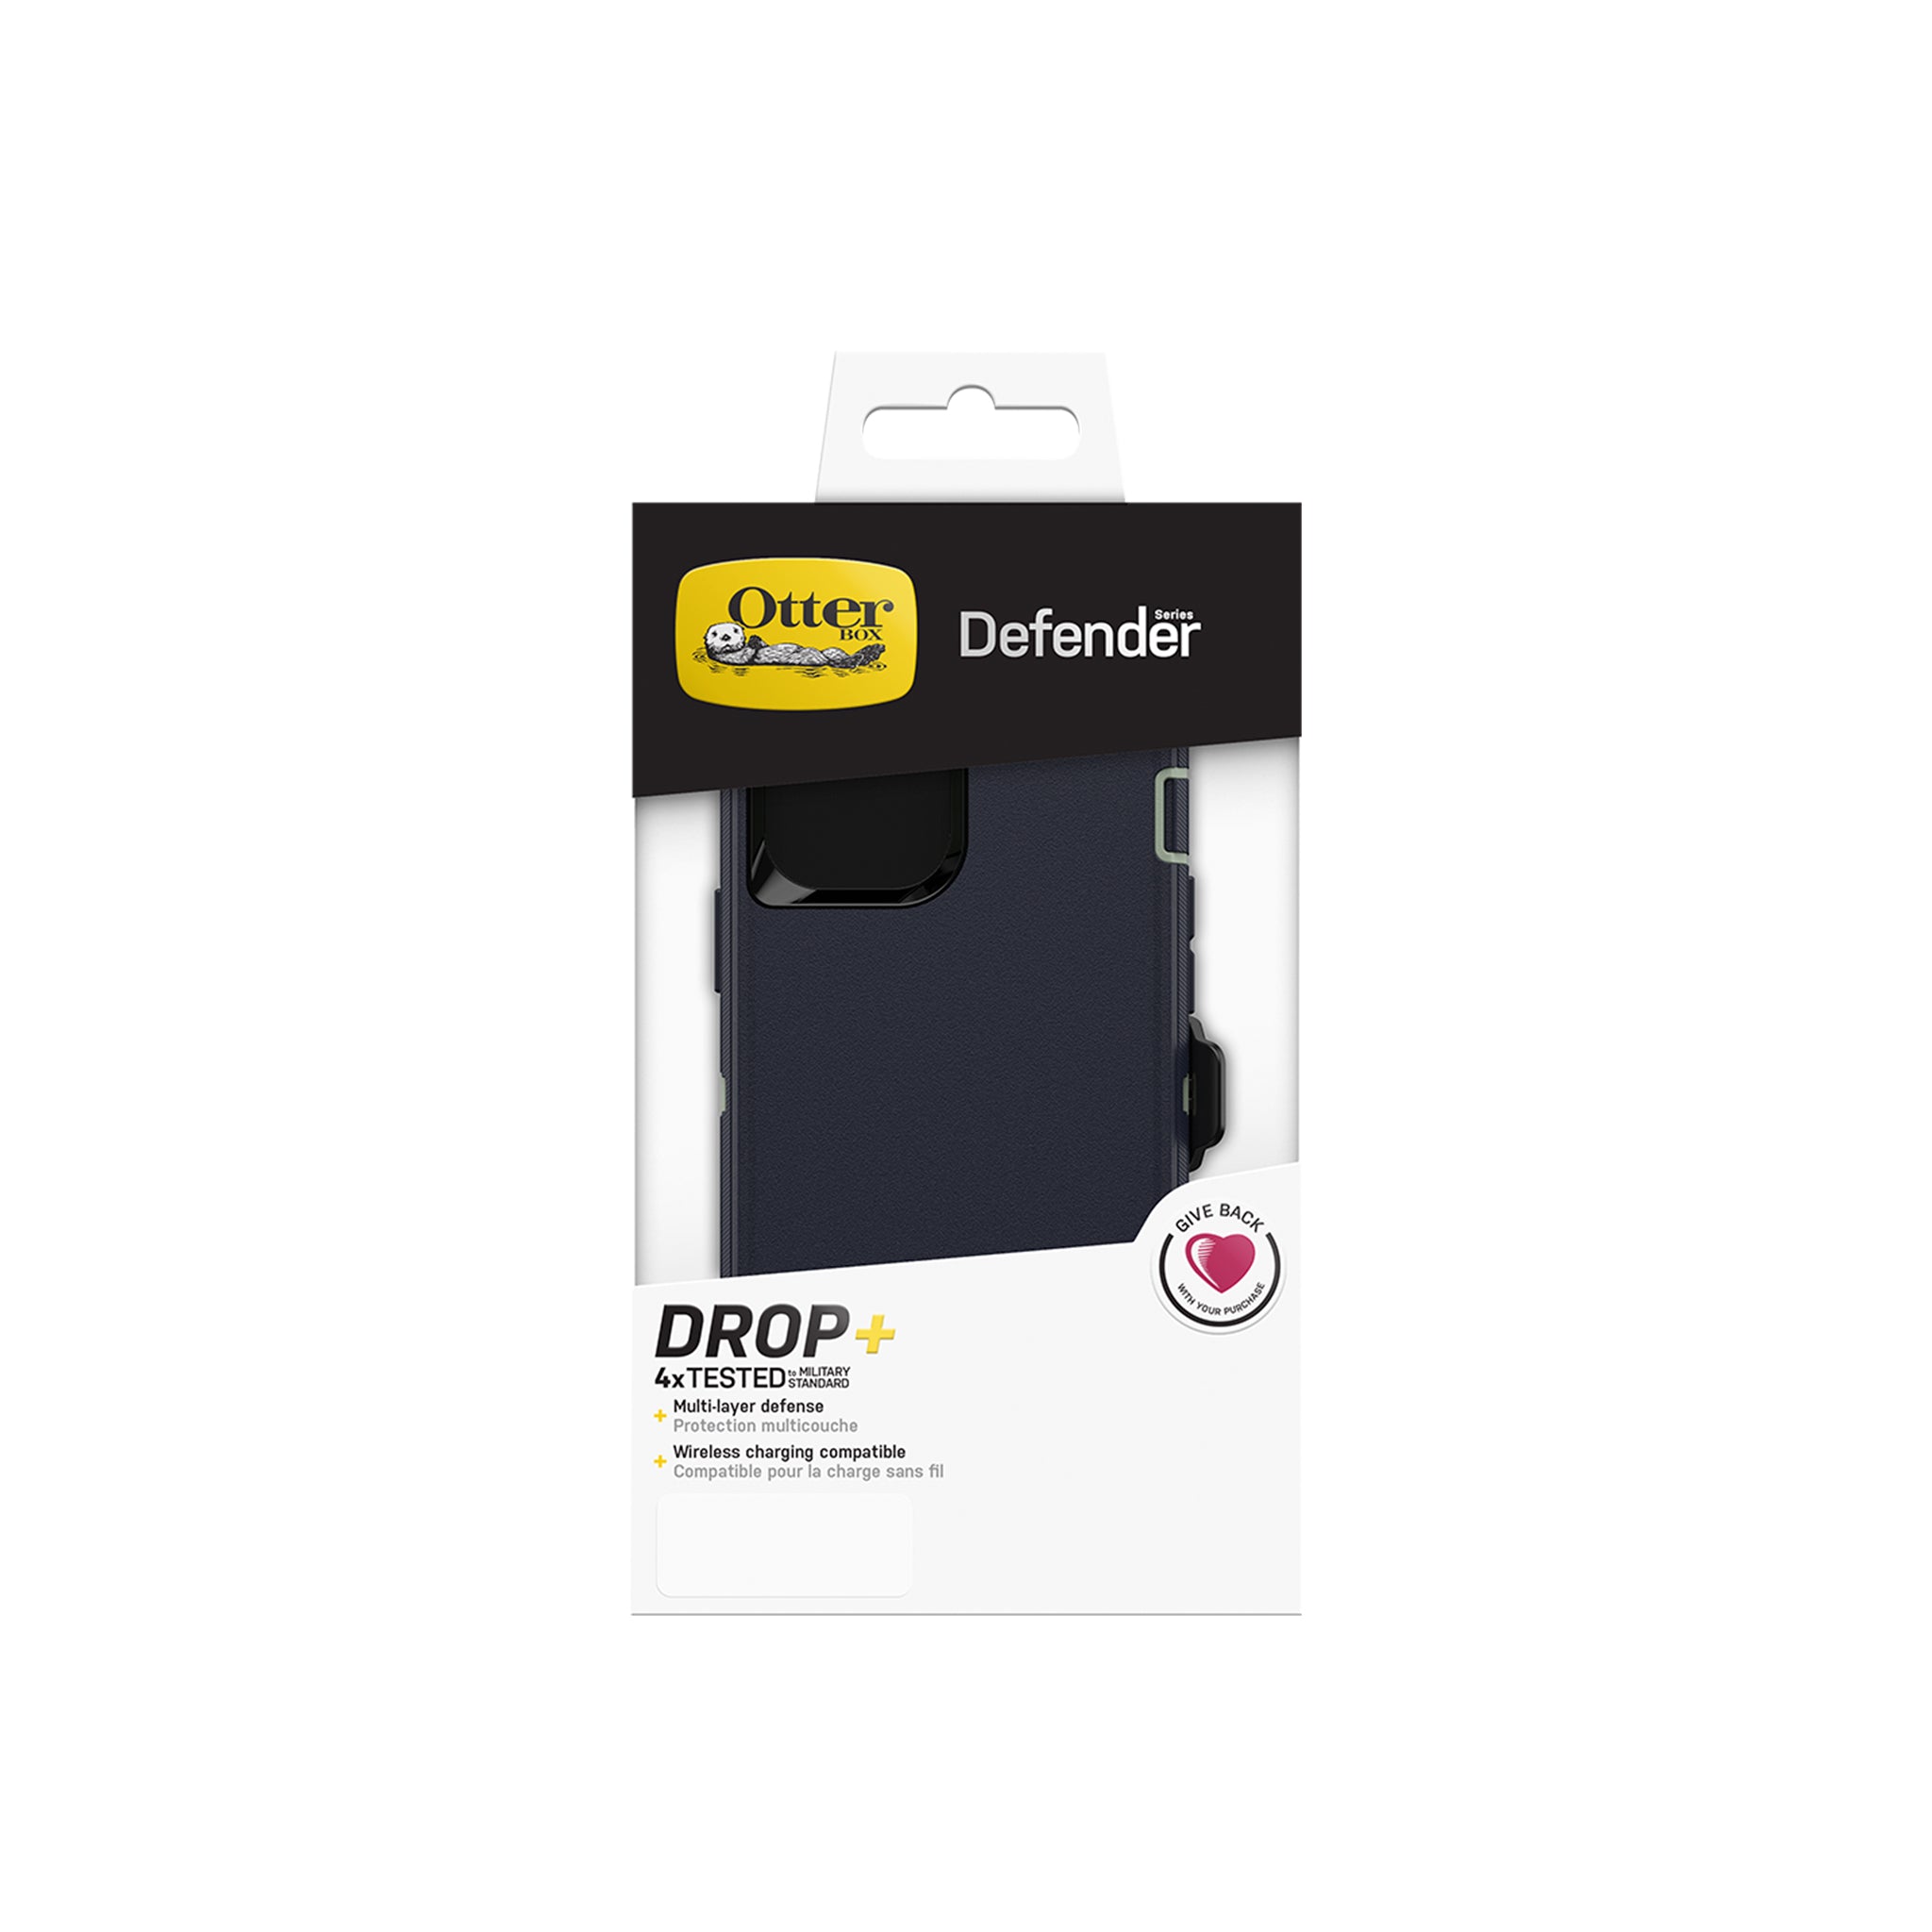 OtterBox - Defender for iPhone 12 / 12 Pro - Varsity Blues